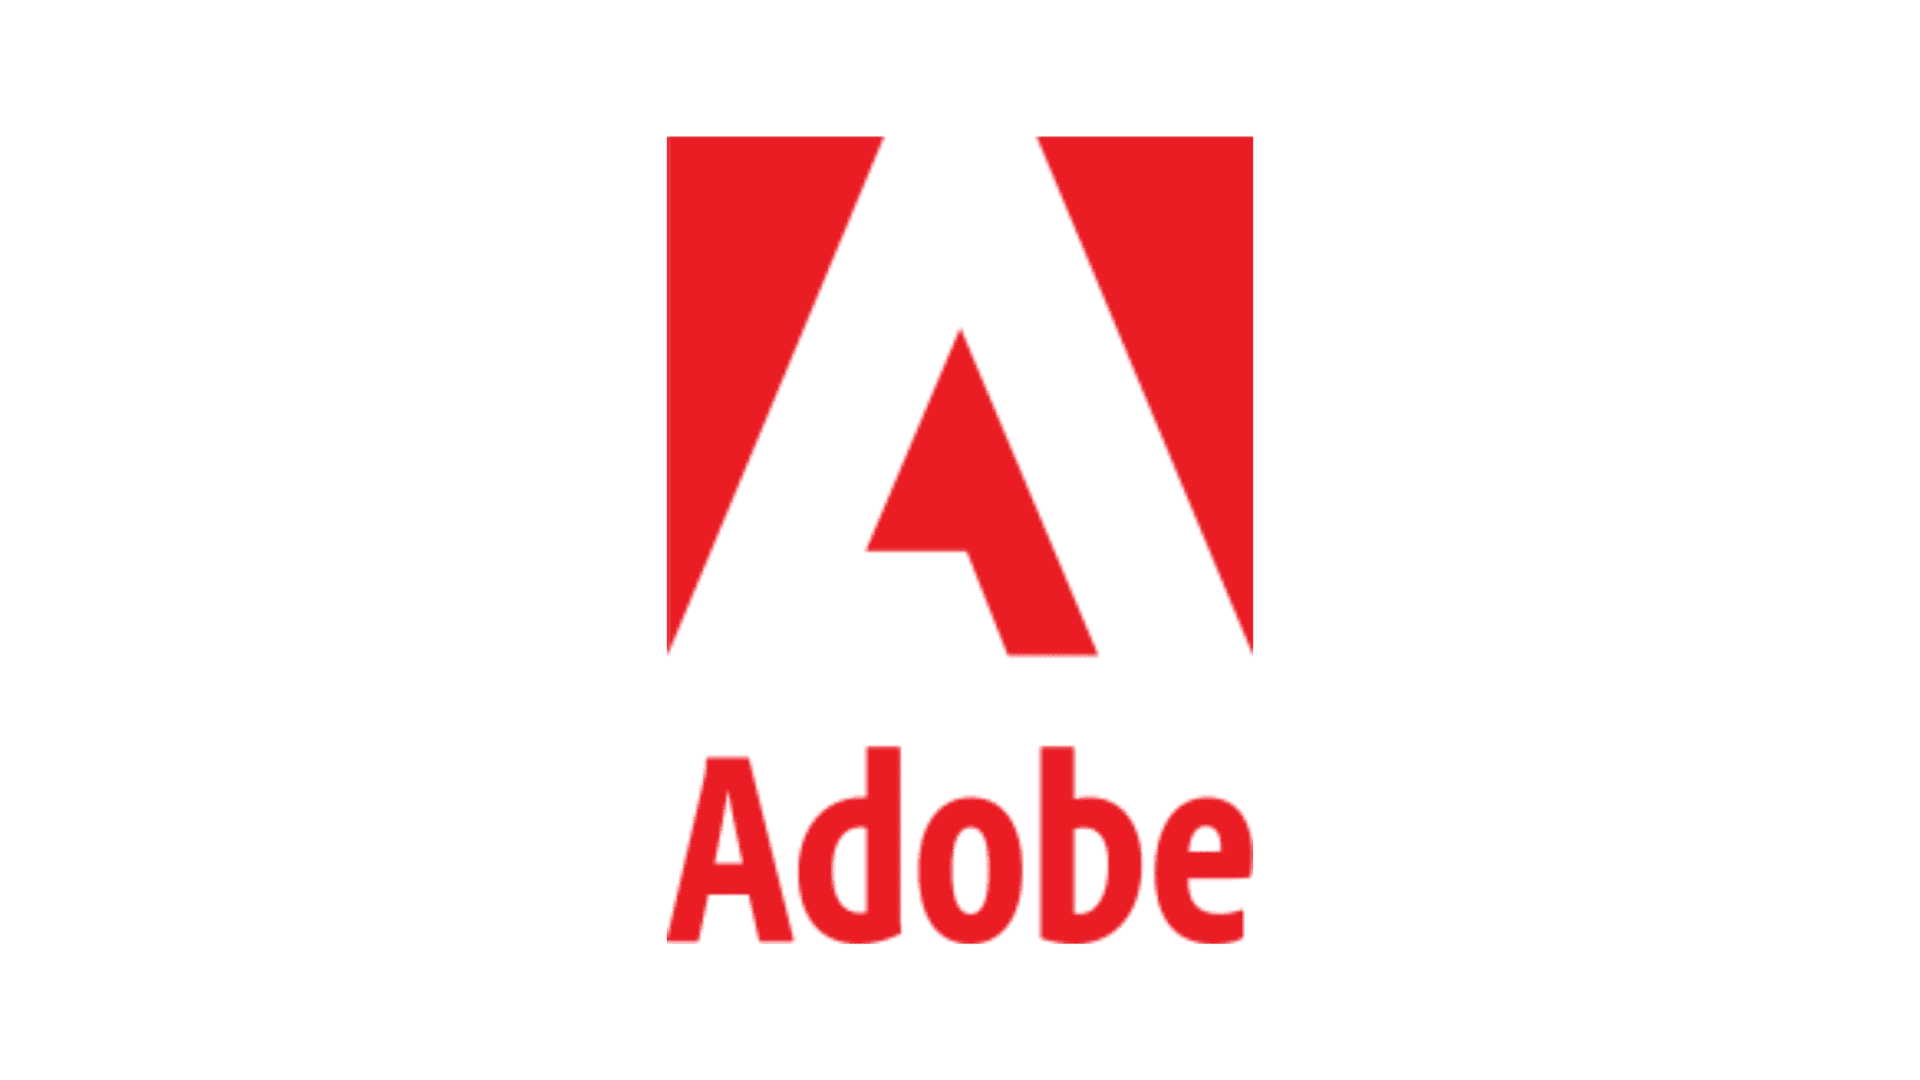 Adobe Logo Data Science Careers Q&A